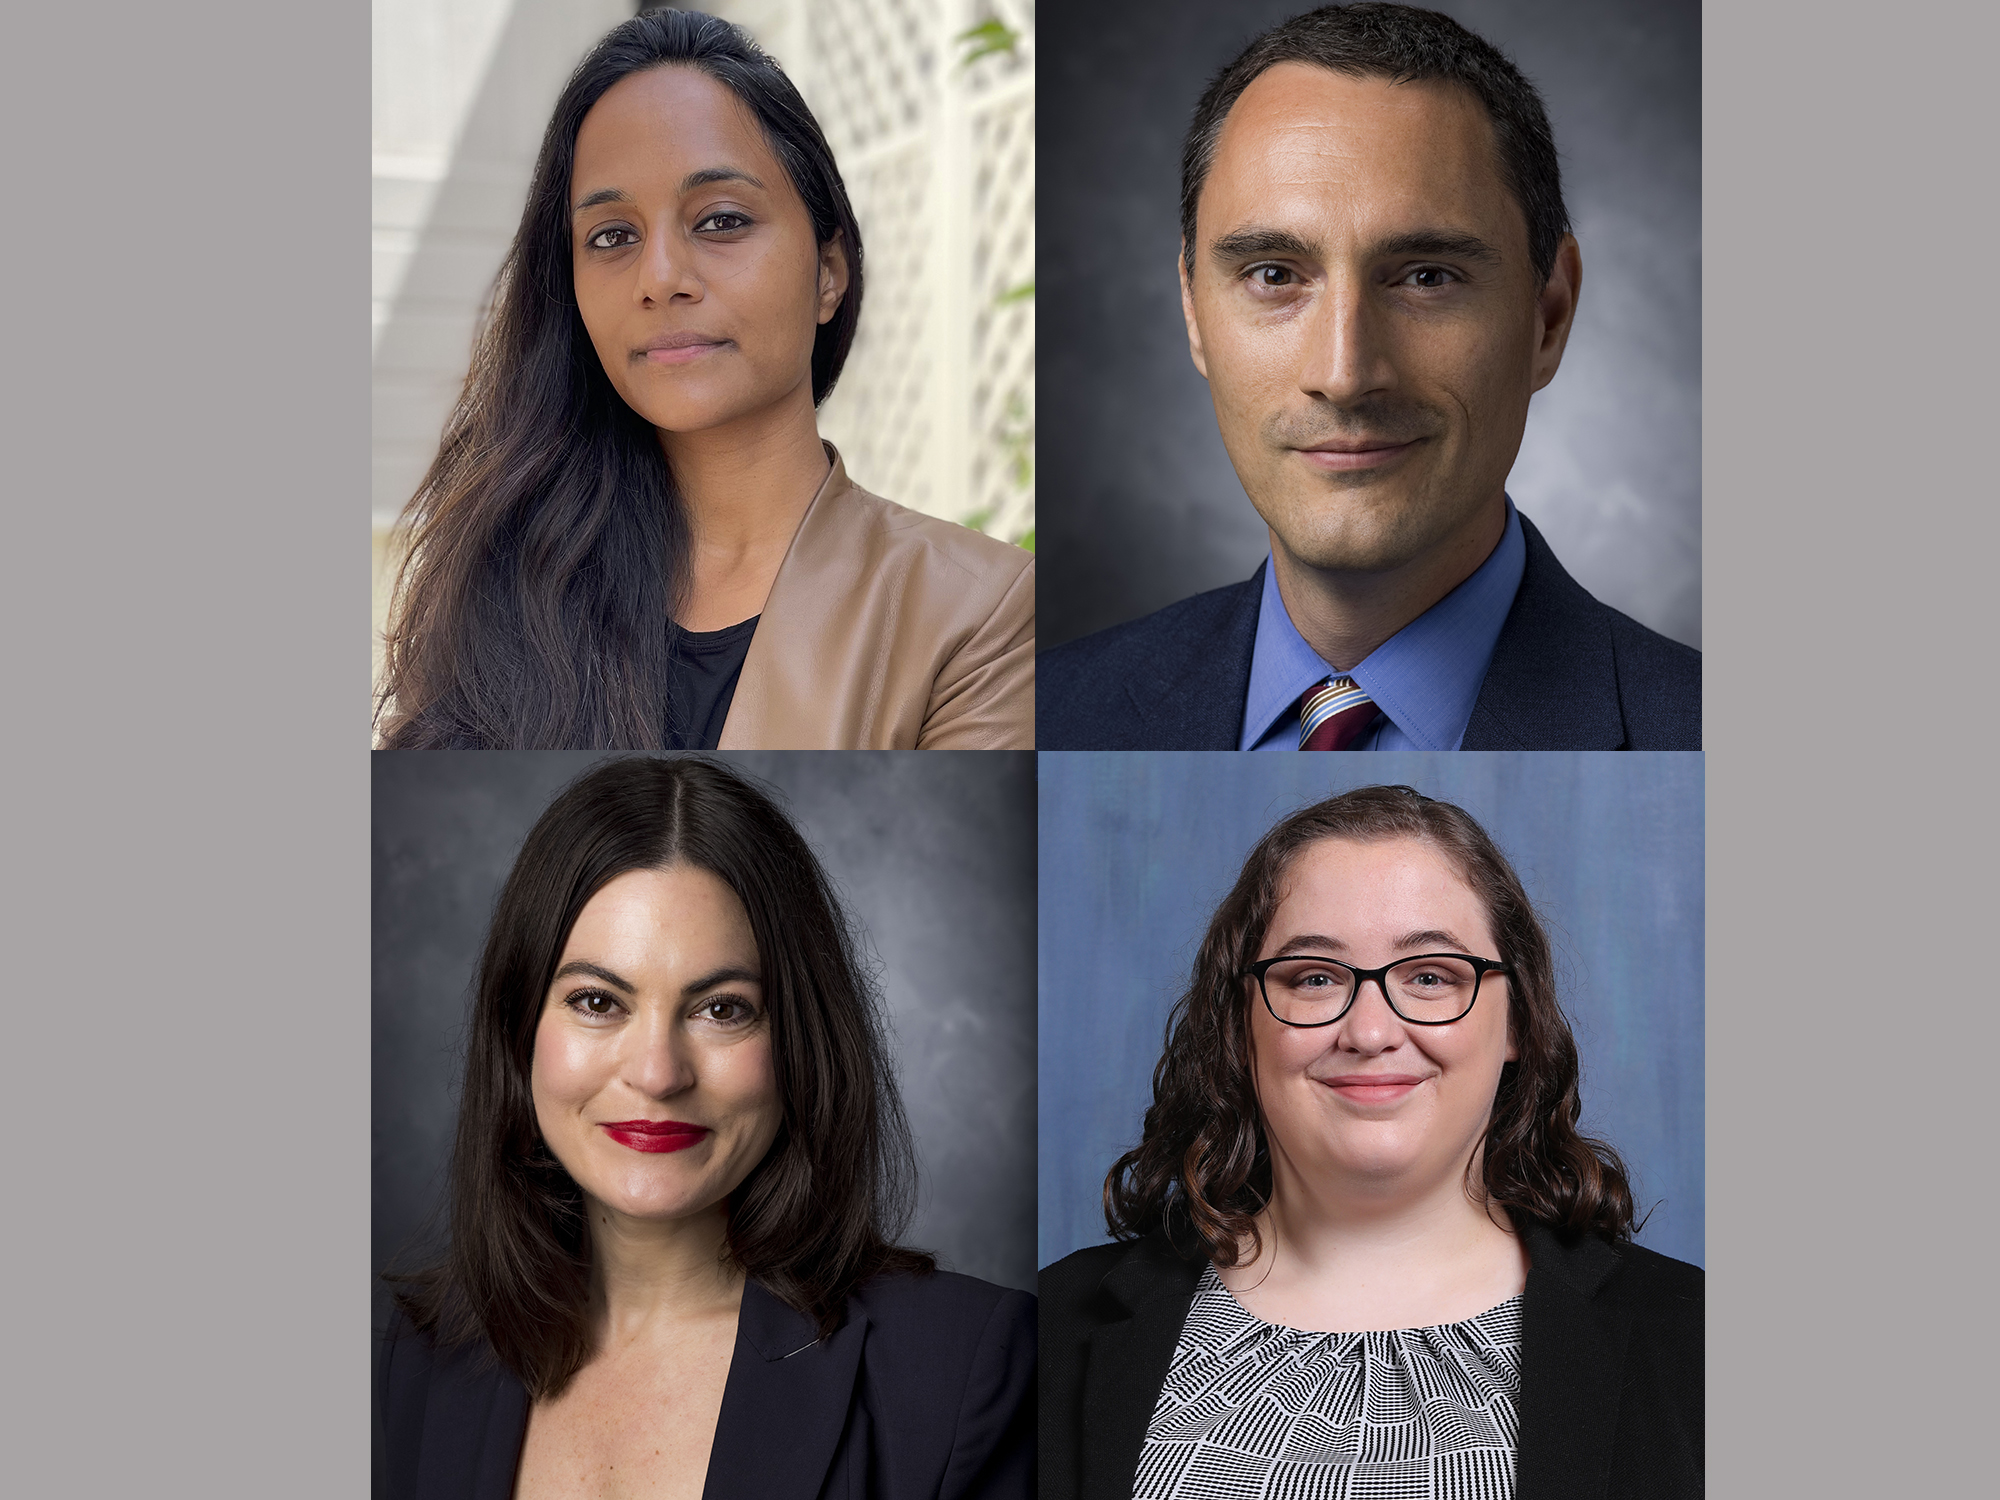 Law school welcomes four new faculty members